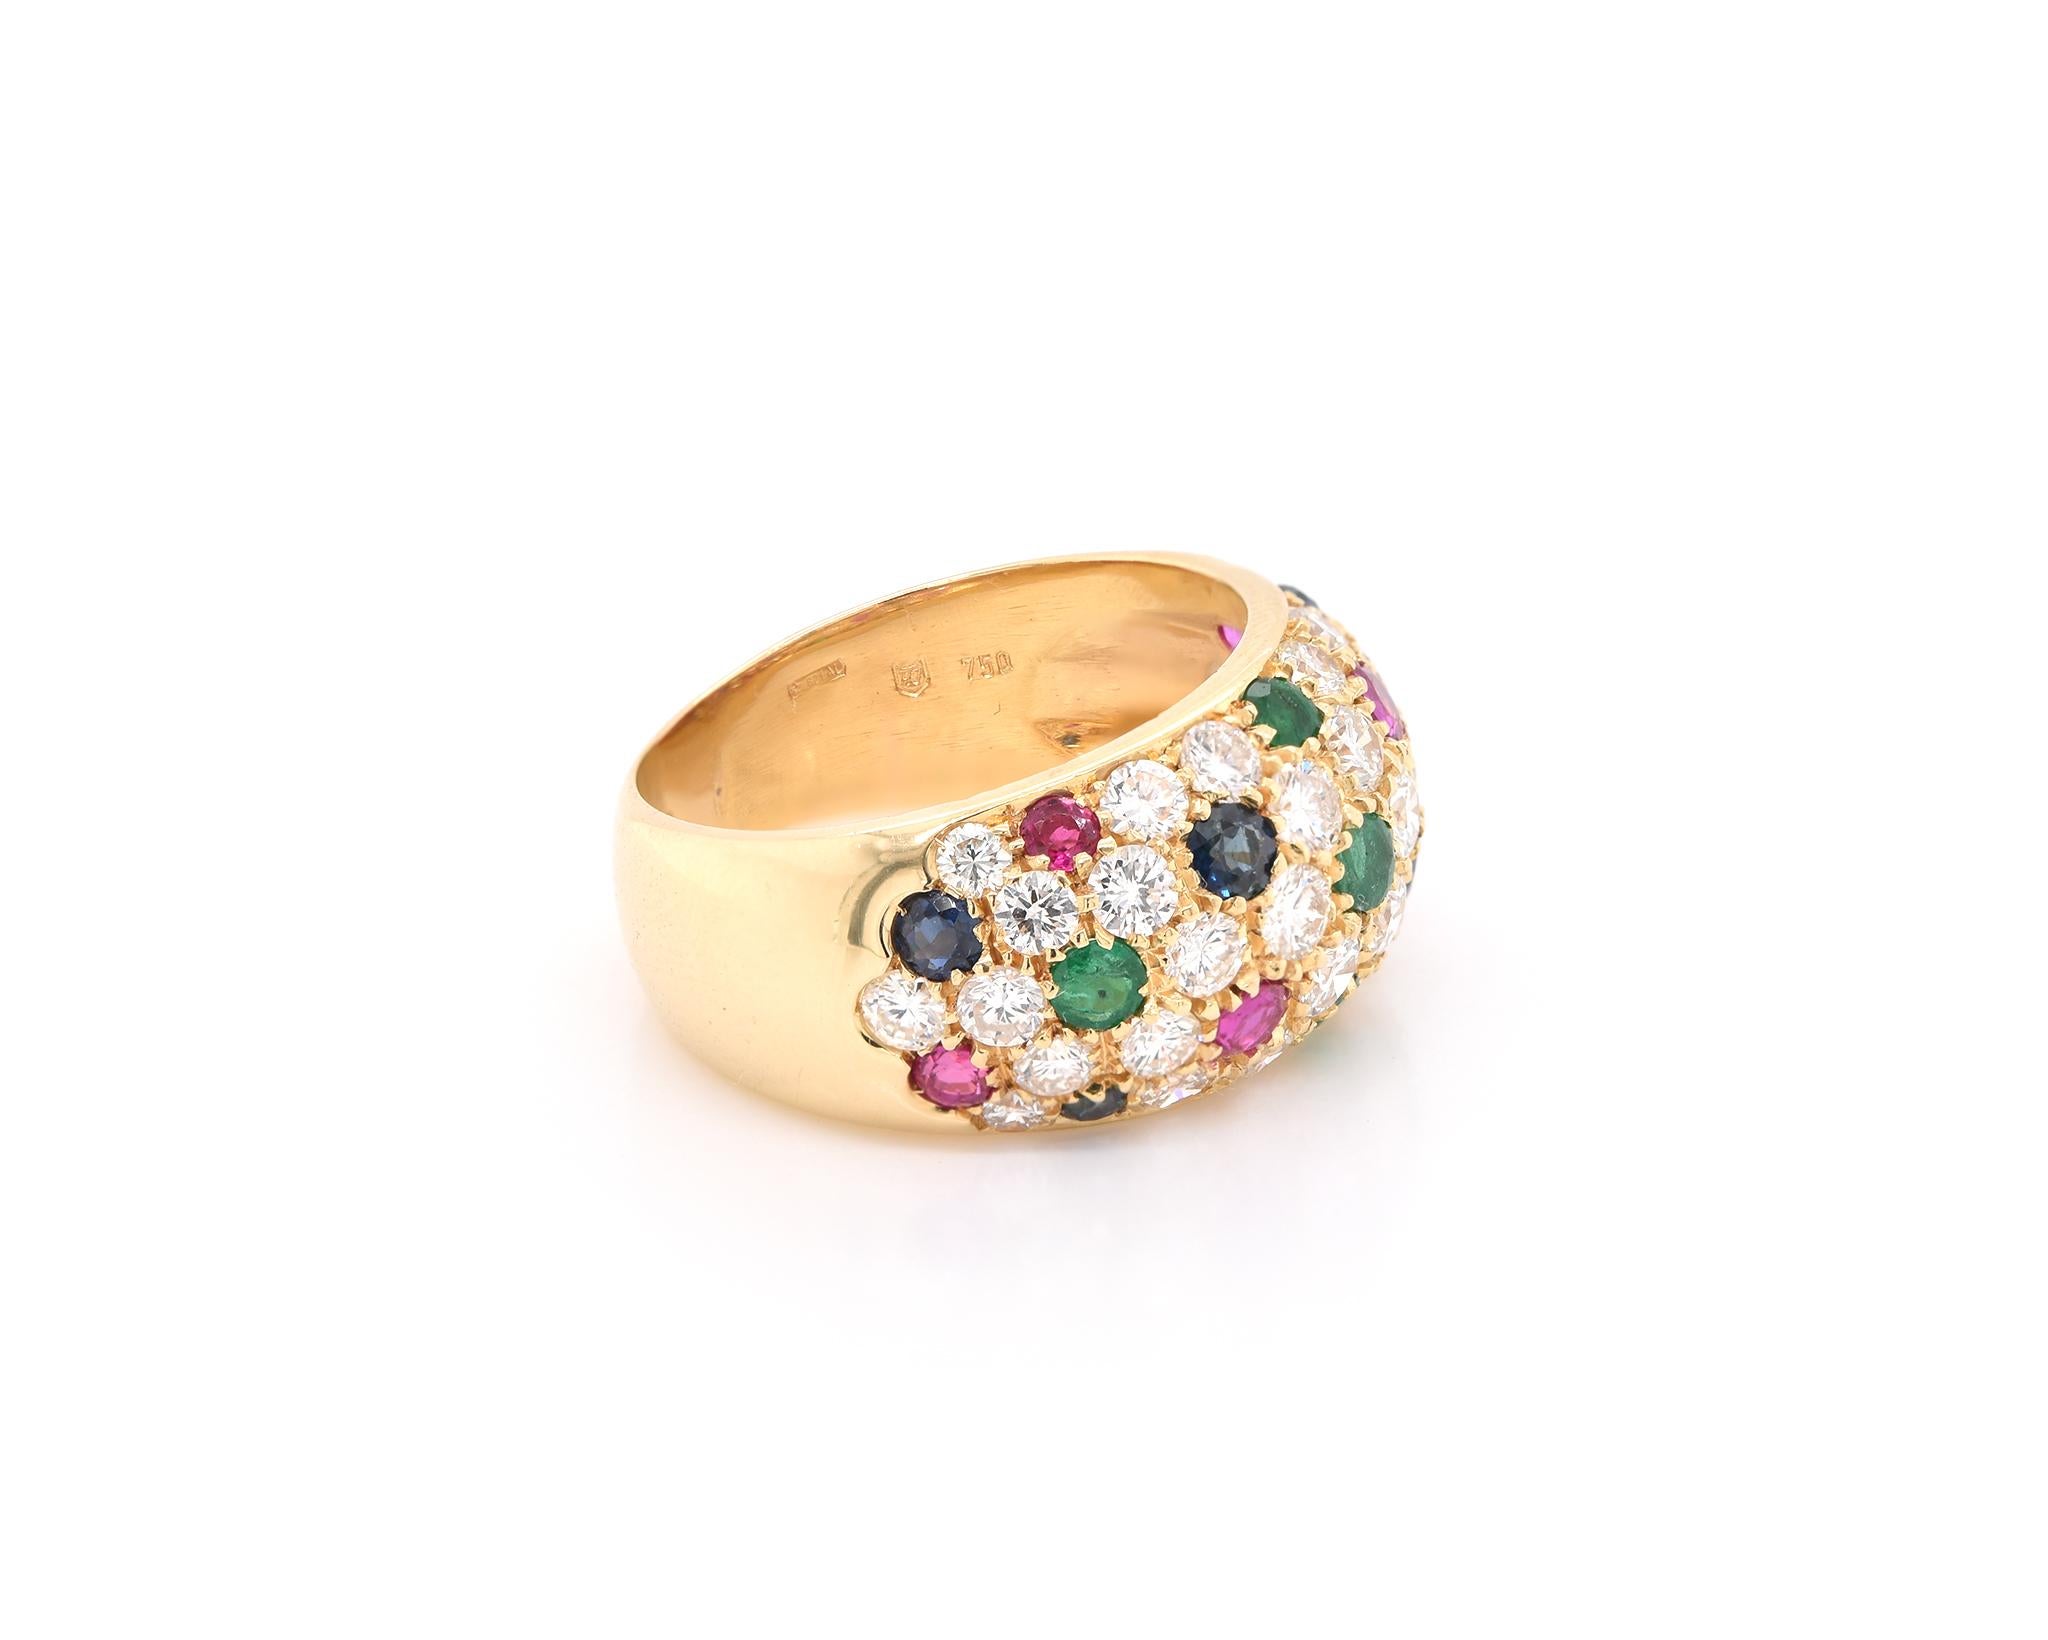 Designer: custom design 
Material: 18k yellow gold 
Diamonds: 32 round brilliant cuts = 2.00cttw
Color: G
Clarity: VS
Ring Size: 6 ¾ (please allow two additional shipping days for sizing requests)
Dimensions: ring top measures 11.20mm wide
Weight: